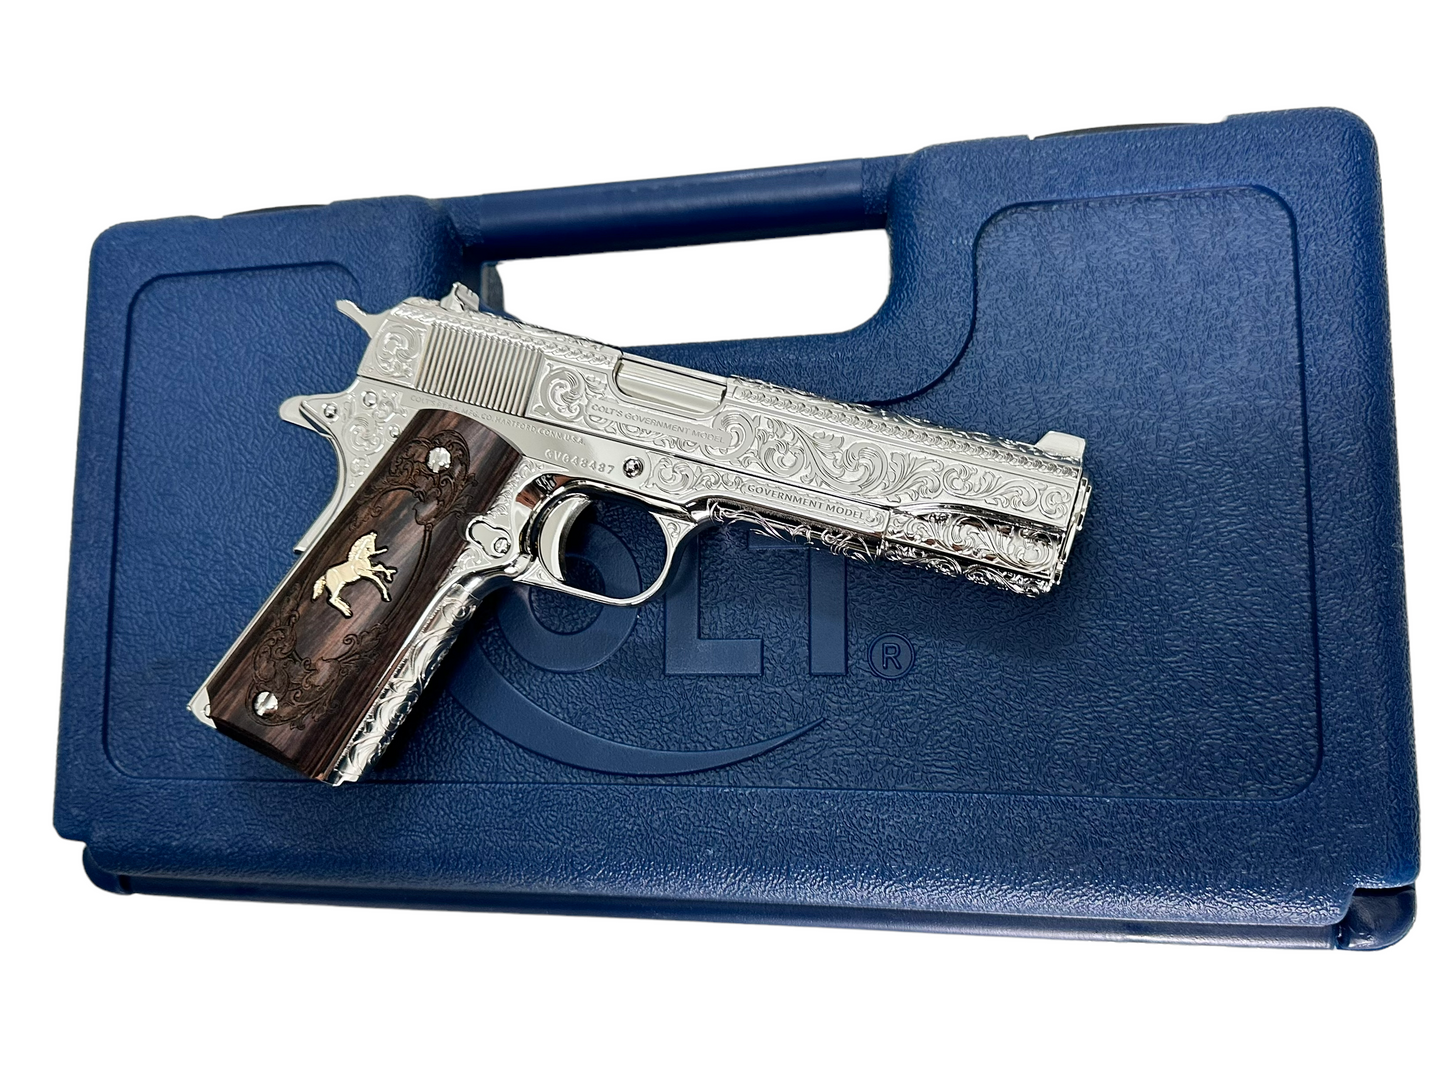 COLT CUSTOM 1911 HIGH POLISHED FULLY ENGRAVED NICKEL PLATED WITH CUSTOM GRIPS .45ACP